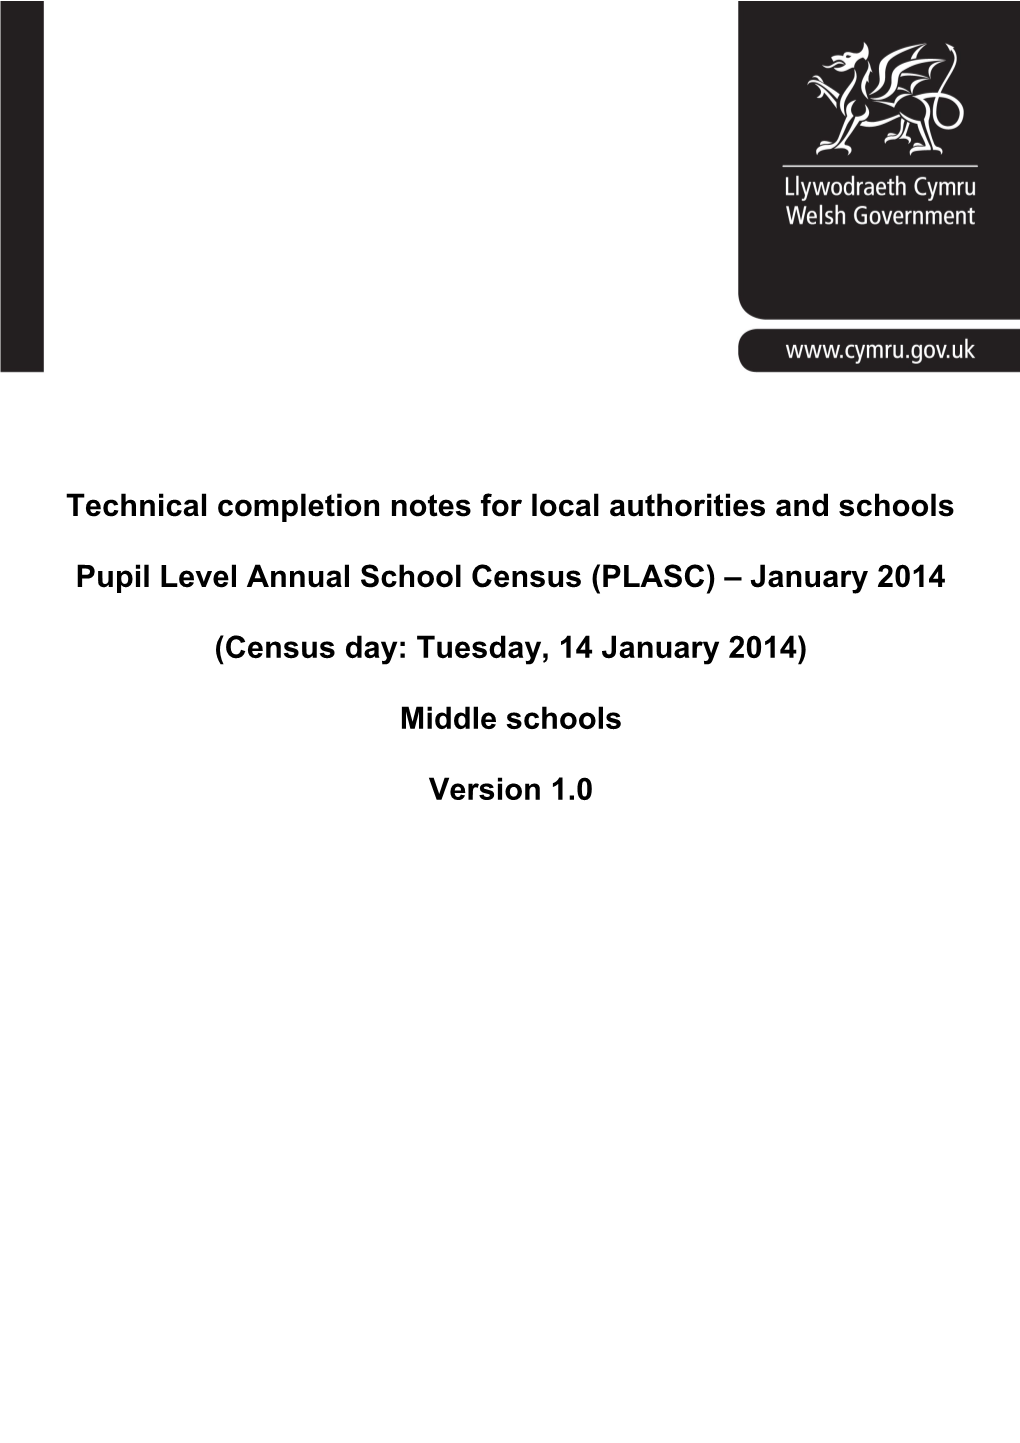 Technical Completion Notes for Local Authorities and Schools